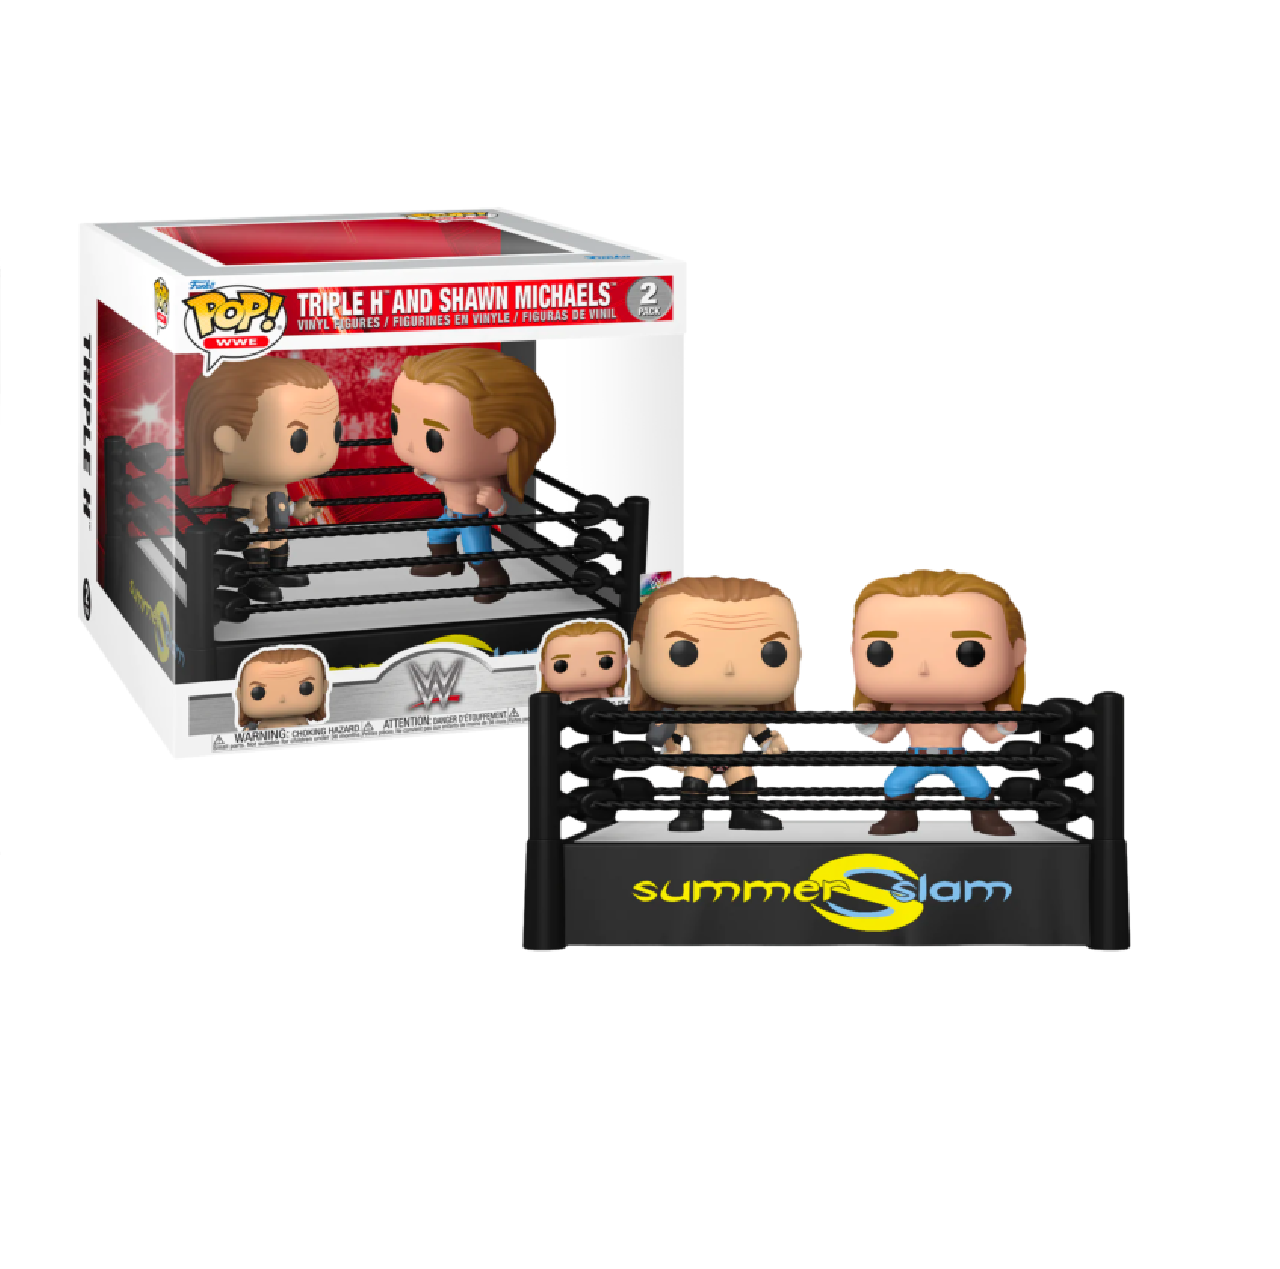 On Hand Triple H and Shawn Michaels 2pack Funko Pop!